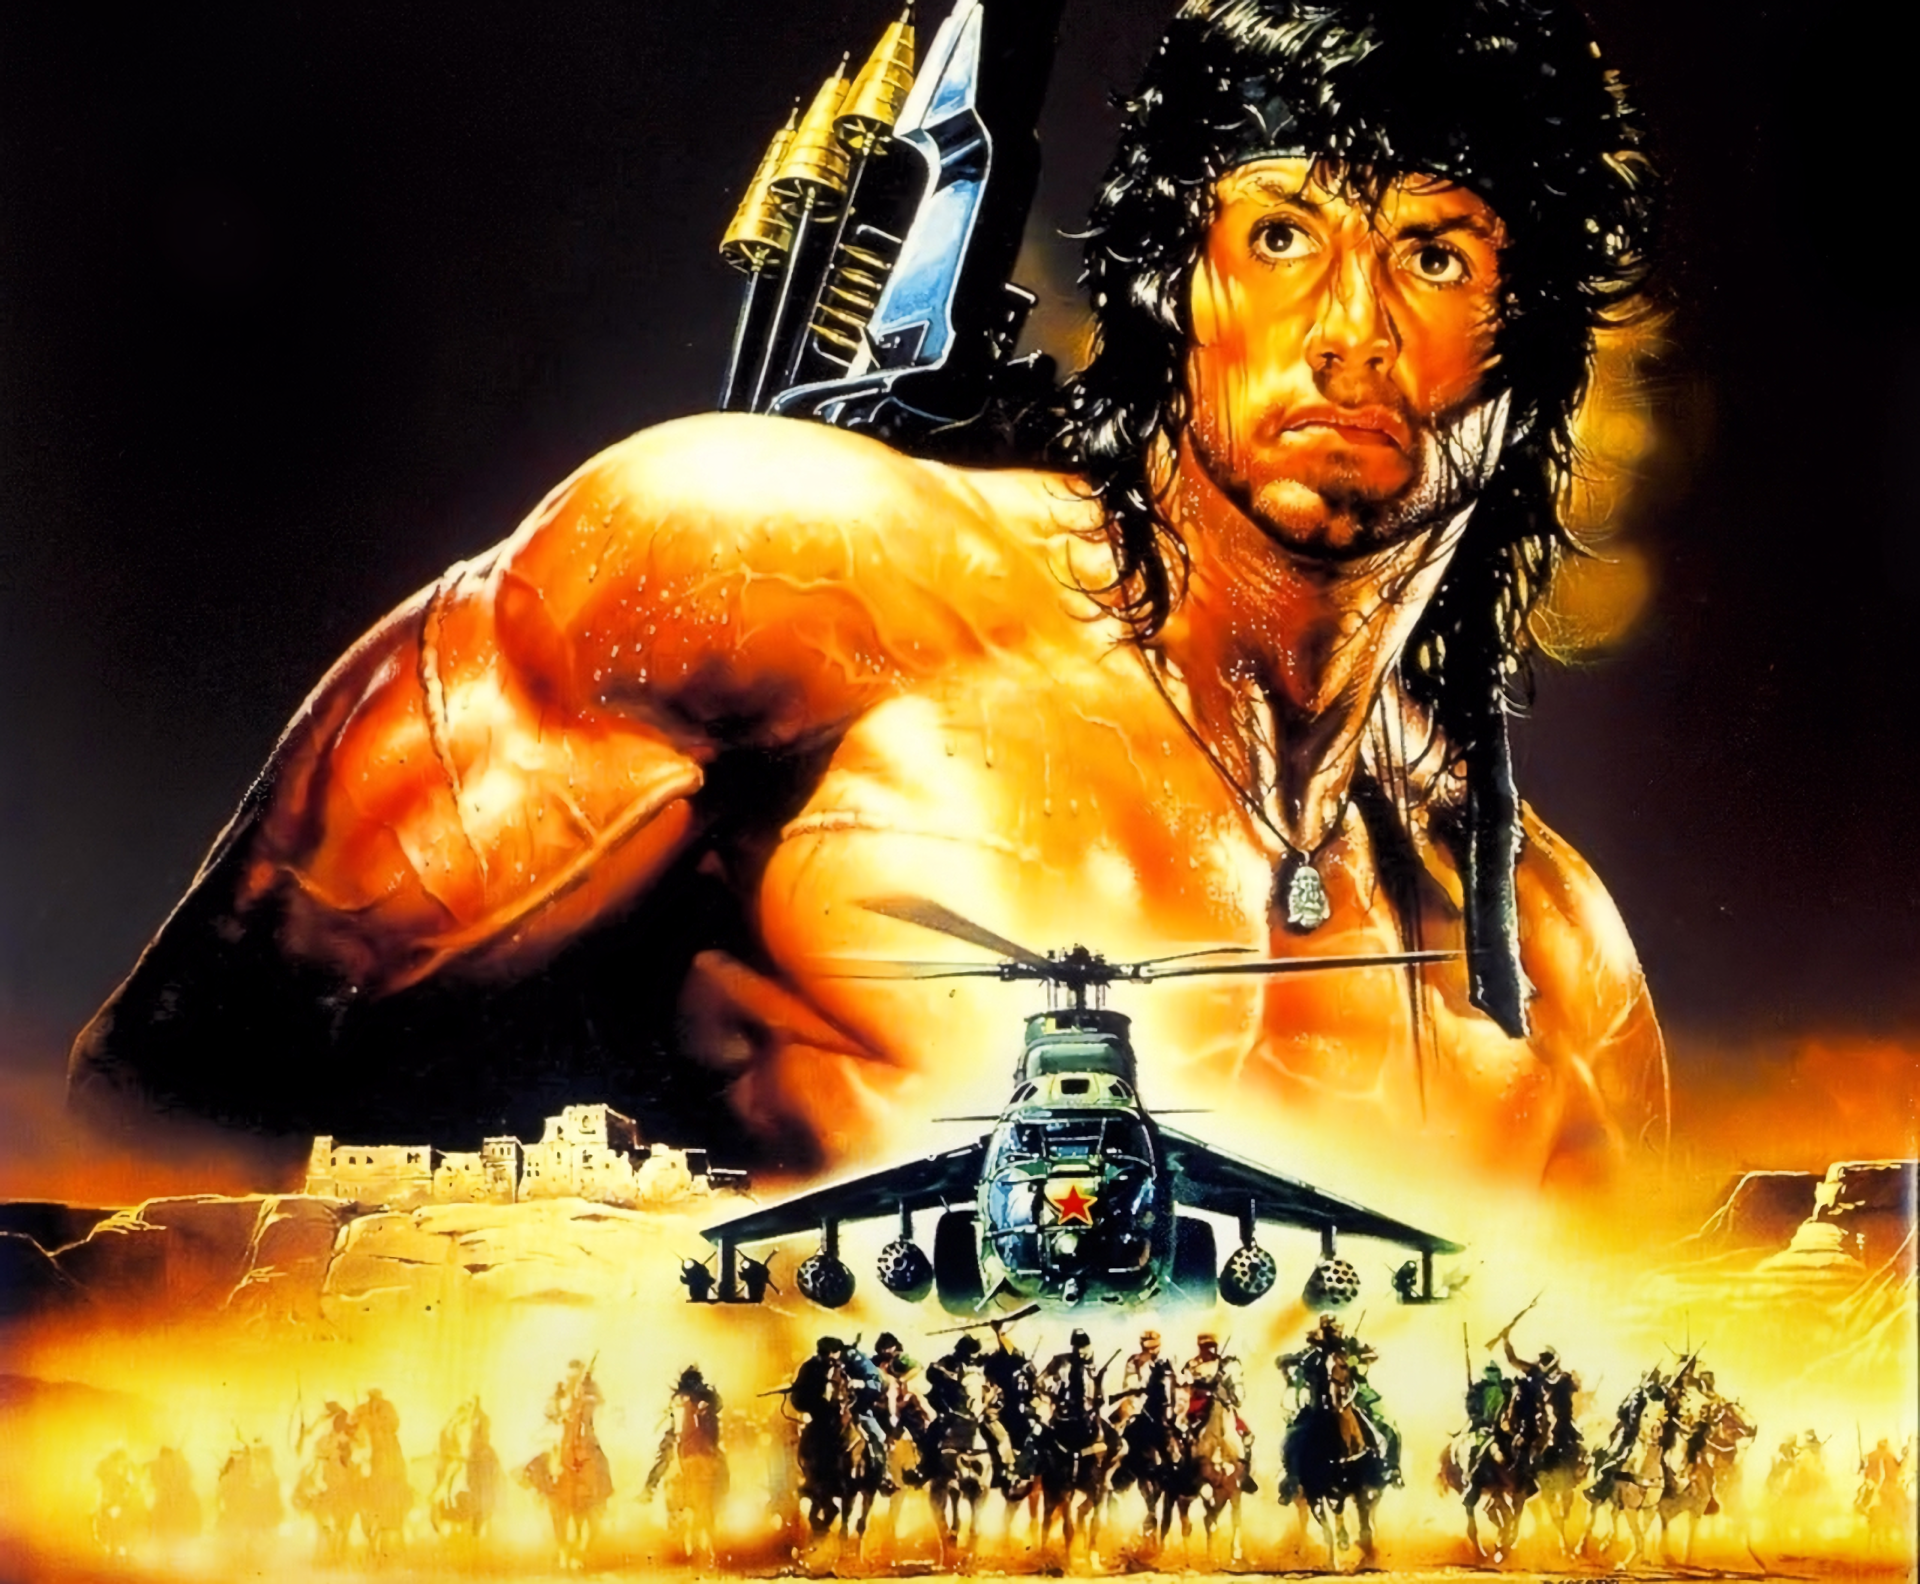 rambo wallpaper hd,poster,movie,games,action film,fictional character